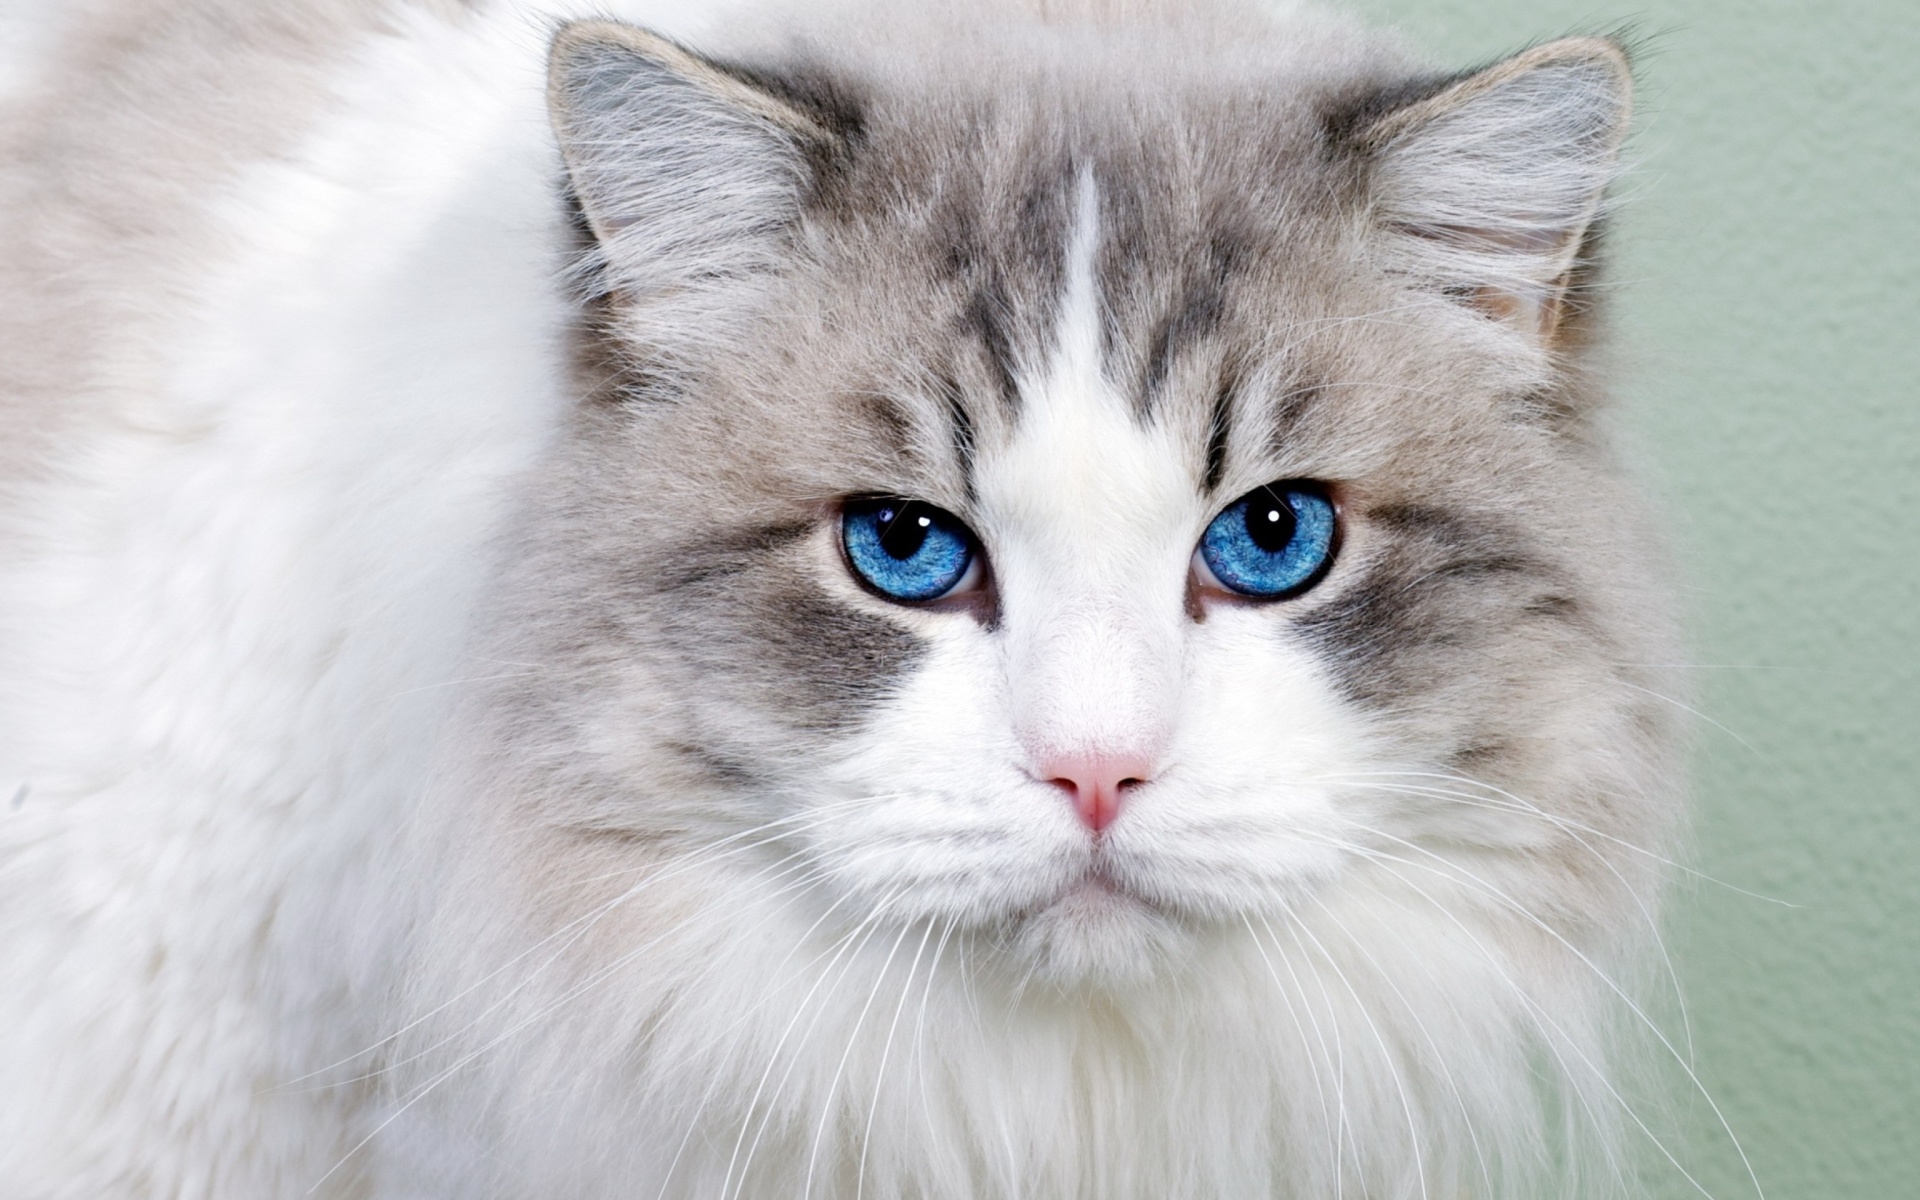 Cat with Blue Eyes wallpaper 1920x1200